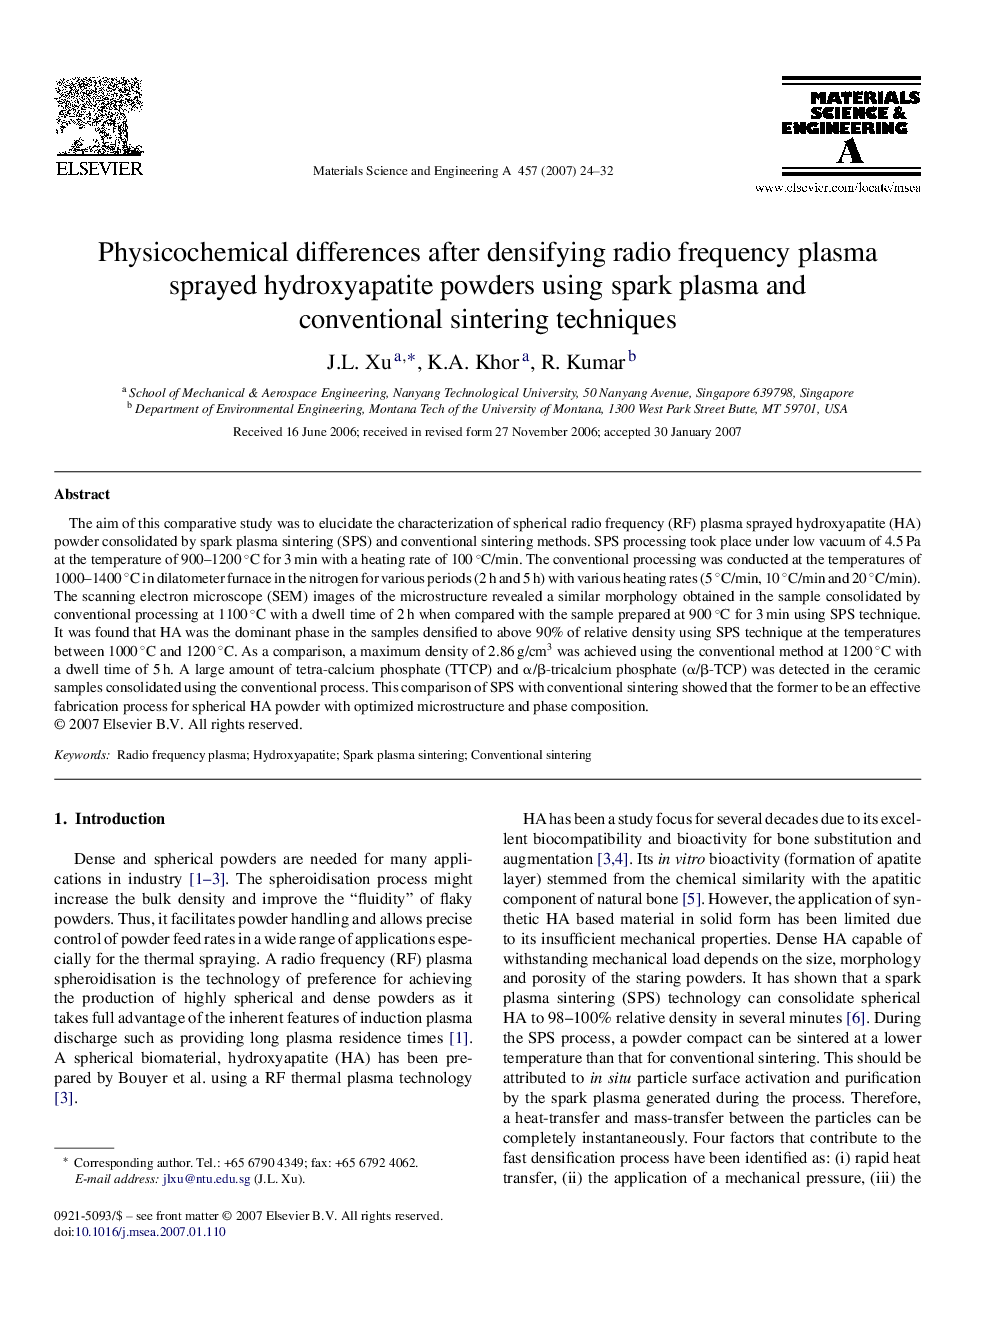 Physicochemical differences after densifying radio frequency plasma sprayed hydroxyapatite powders using spark plasma and conventional sintering techniques